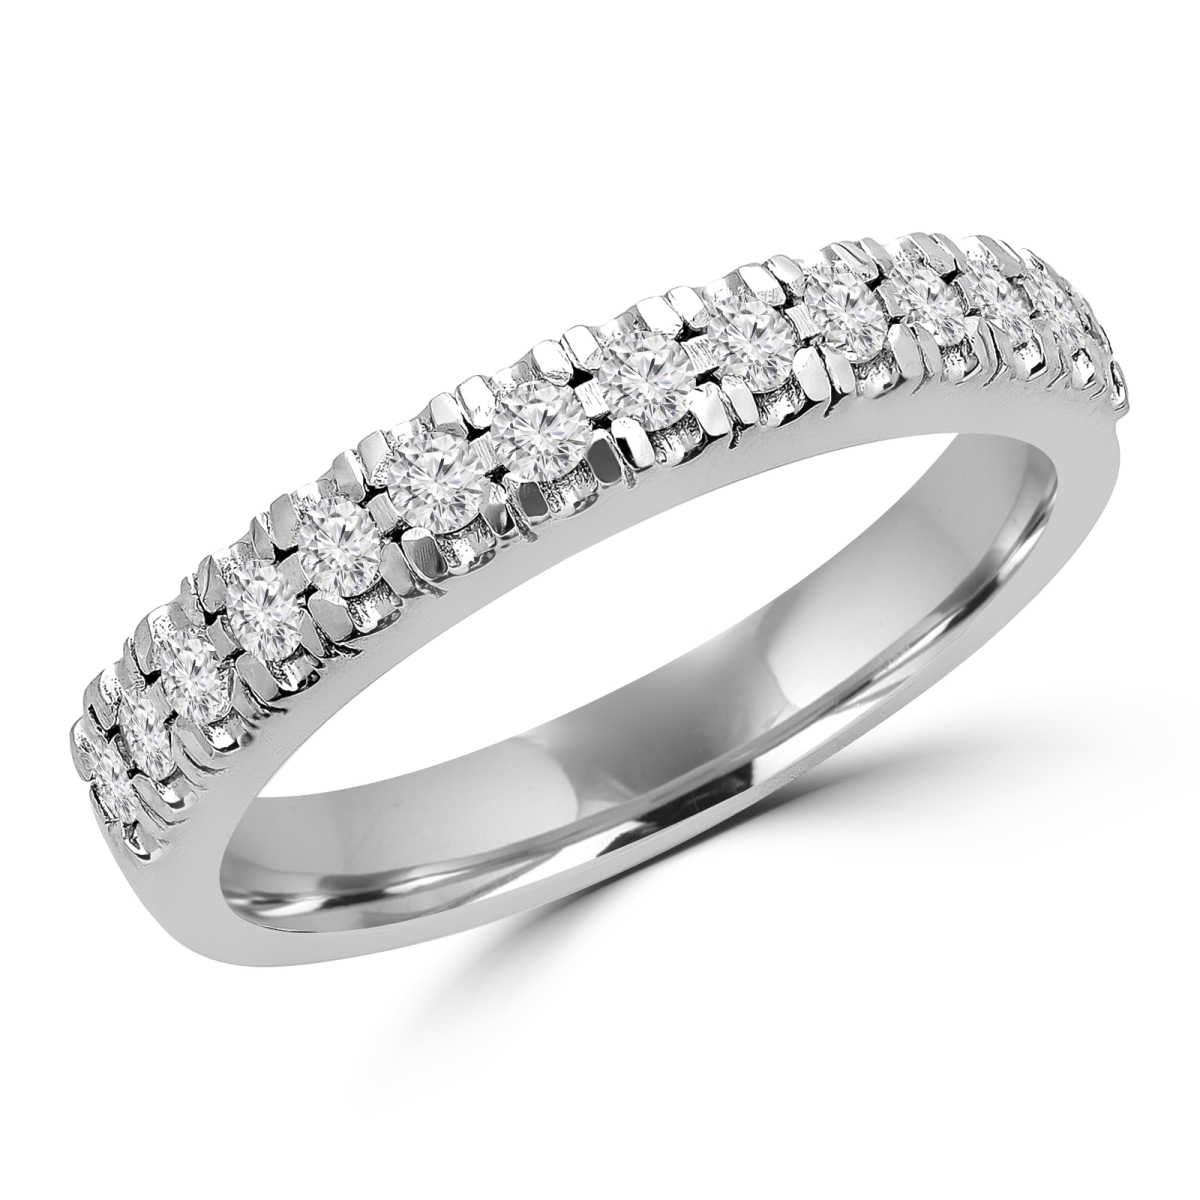 Picture of Majesty Diamonds MD170257-8 0.33 CTW Round Diamond Semi-Eternity Wedding Band Ring in 14K White Gold - Size 8